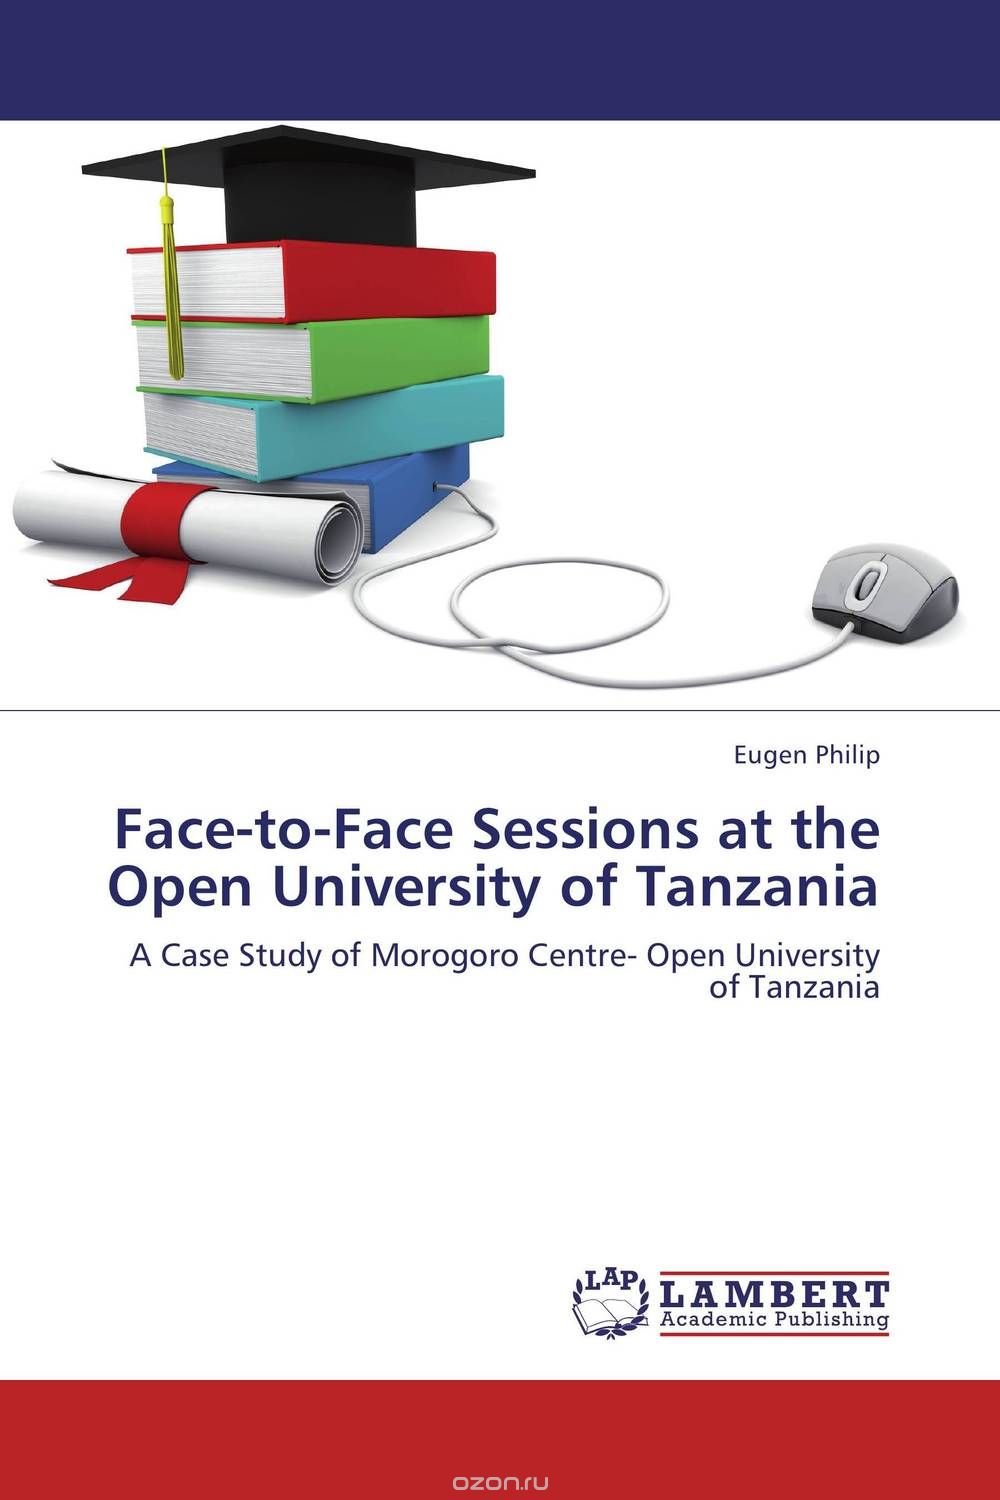 Скачать книгу "Face-to-Face Sessions at the Open University of Tanzania"